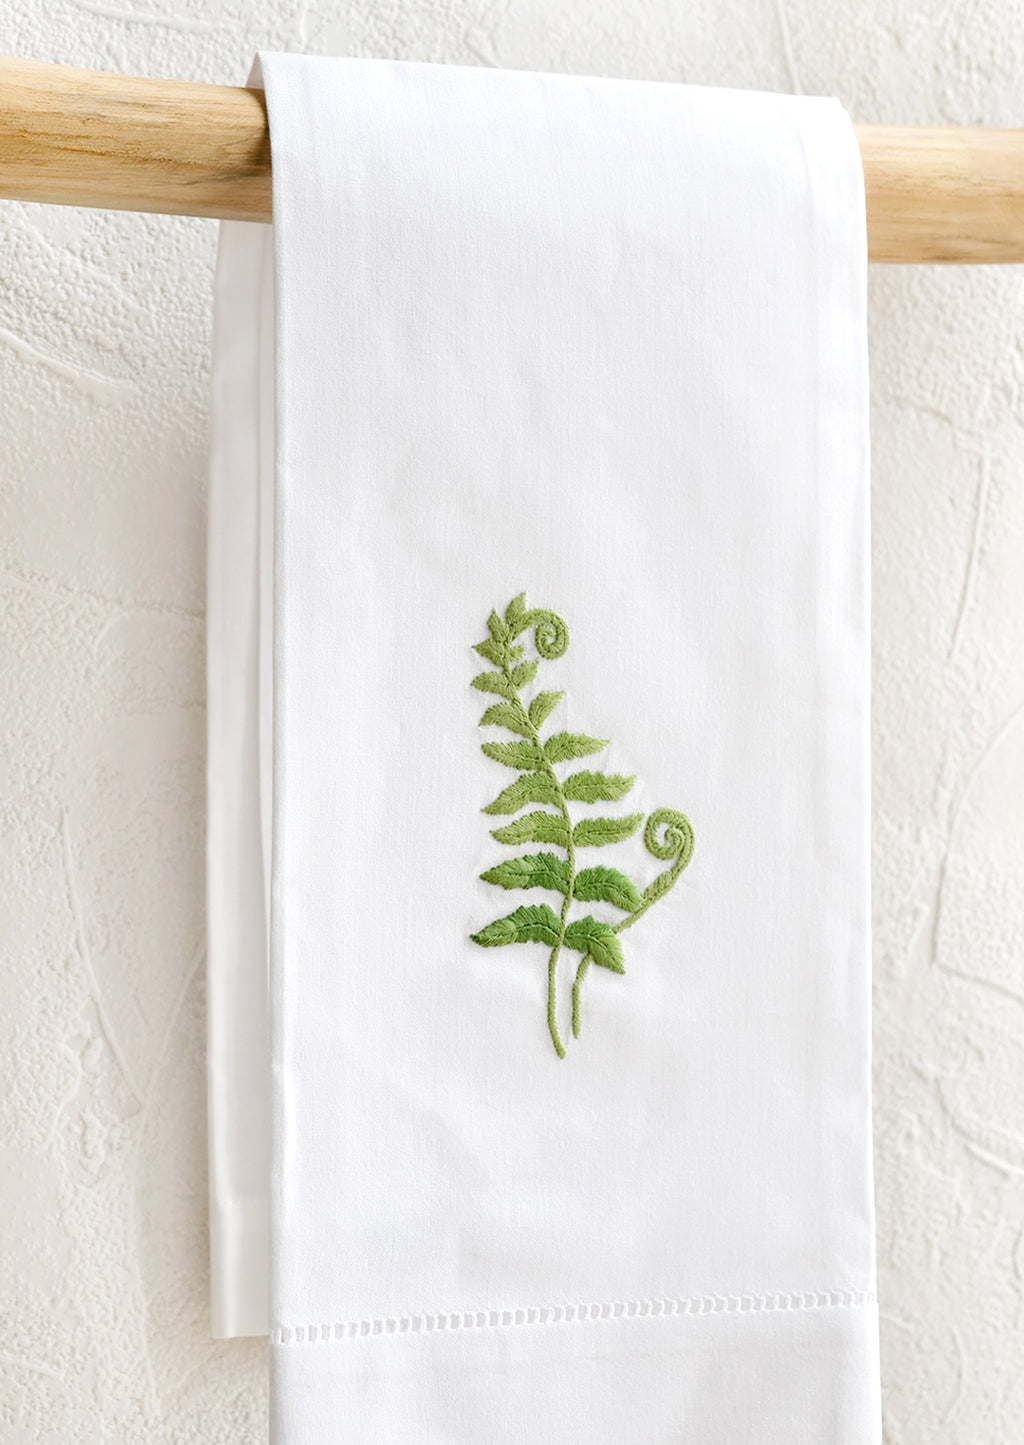 Fern Frond: A white folded cotton hand towel with embroidered fern design.